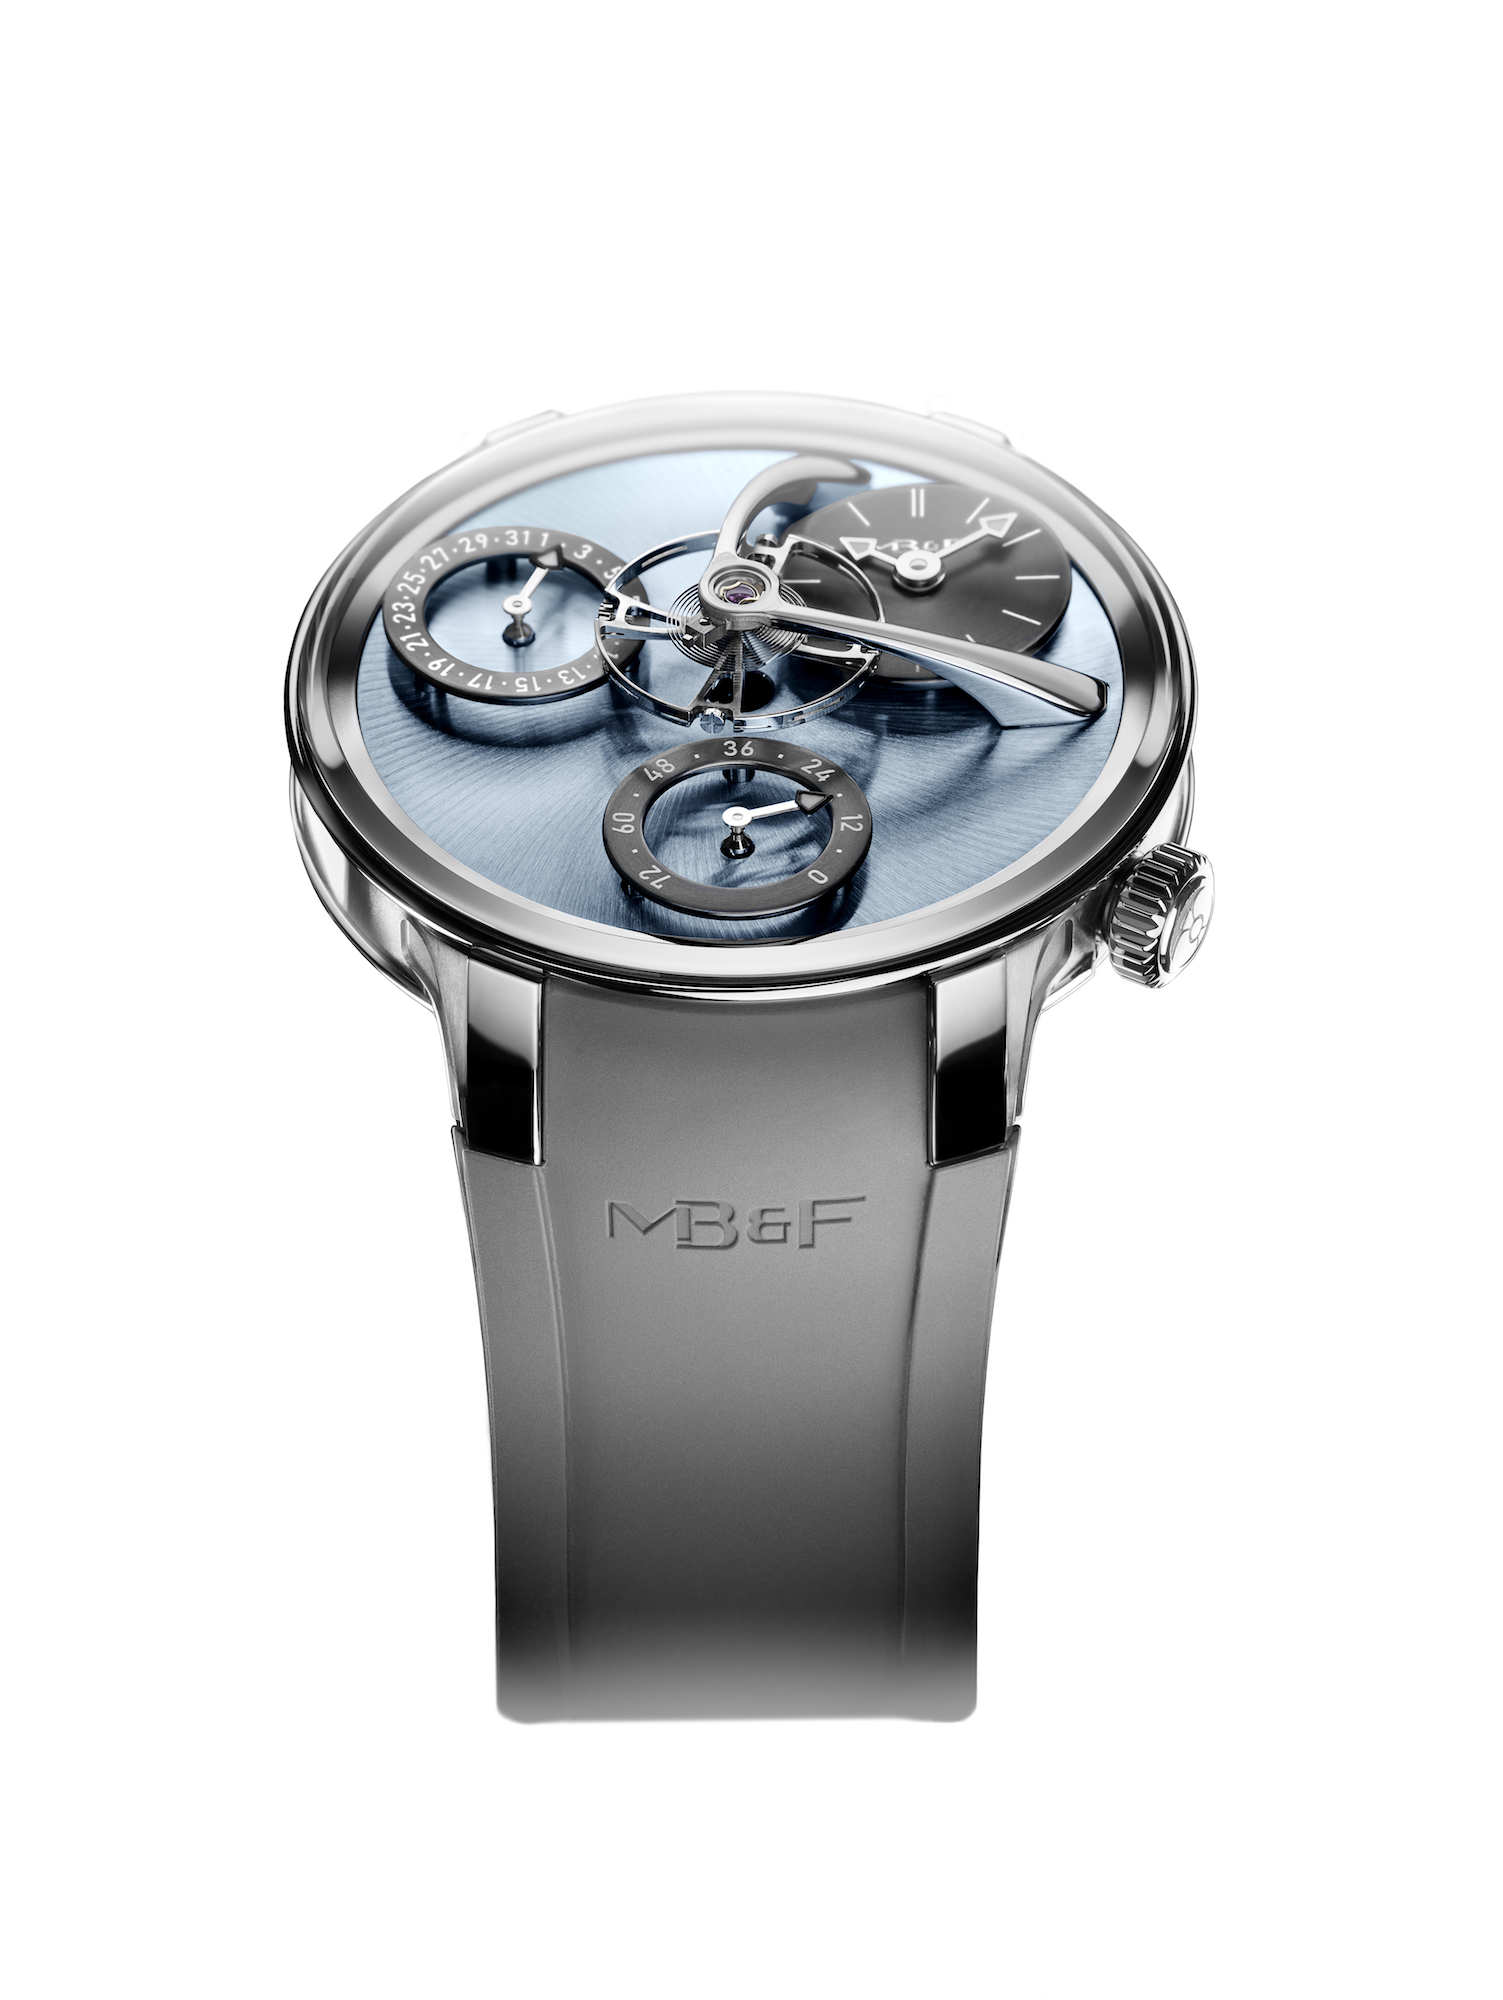 mb&f new watches luxury watch edition limited collection chronograph swiss watch switzerland